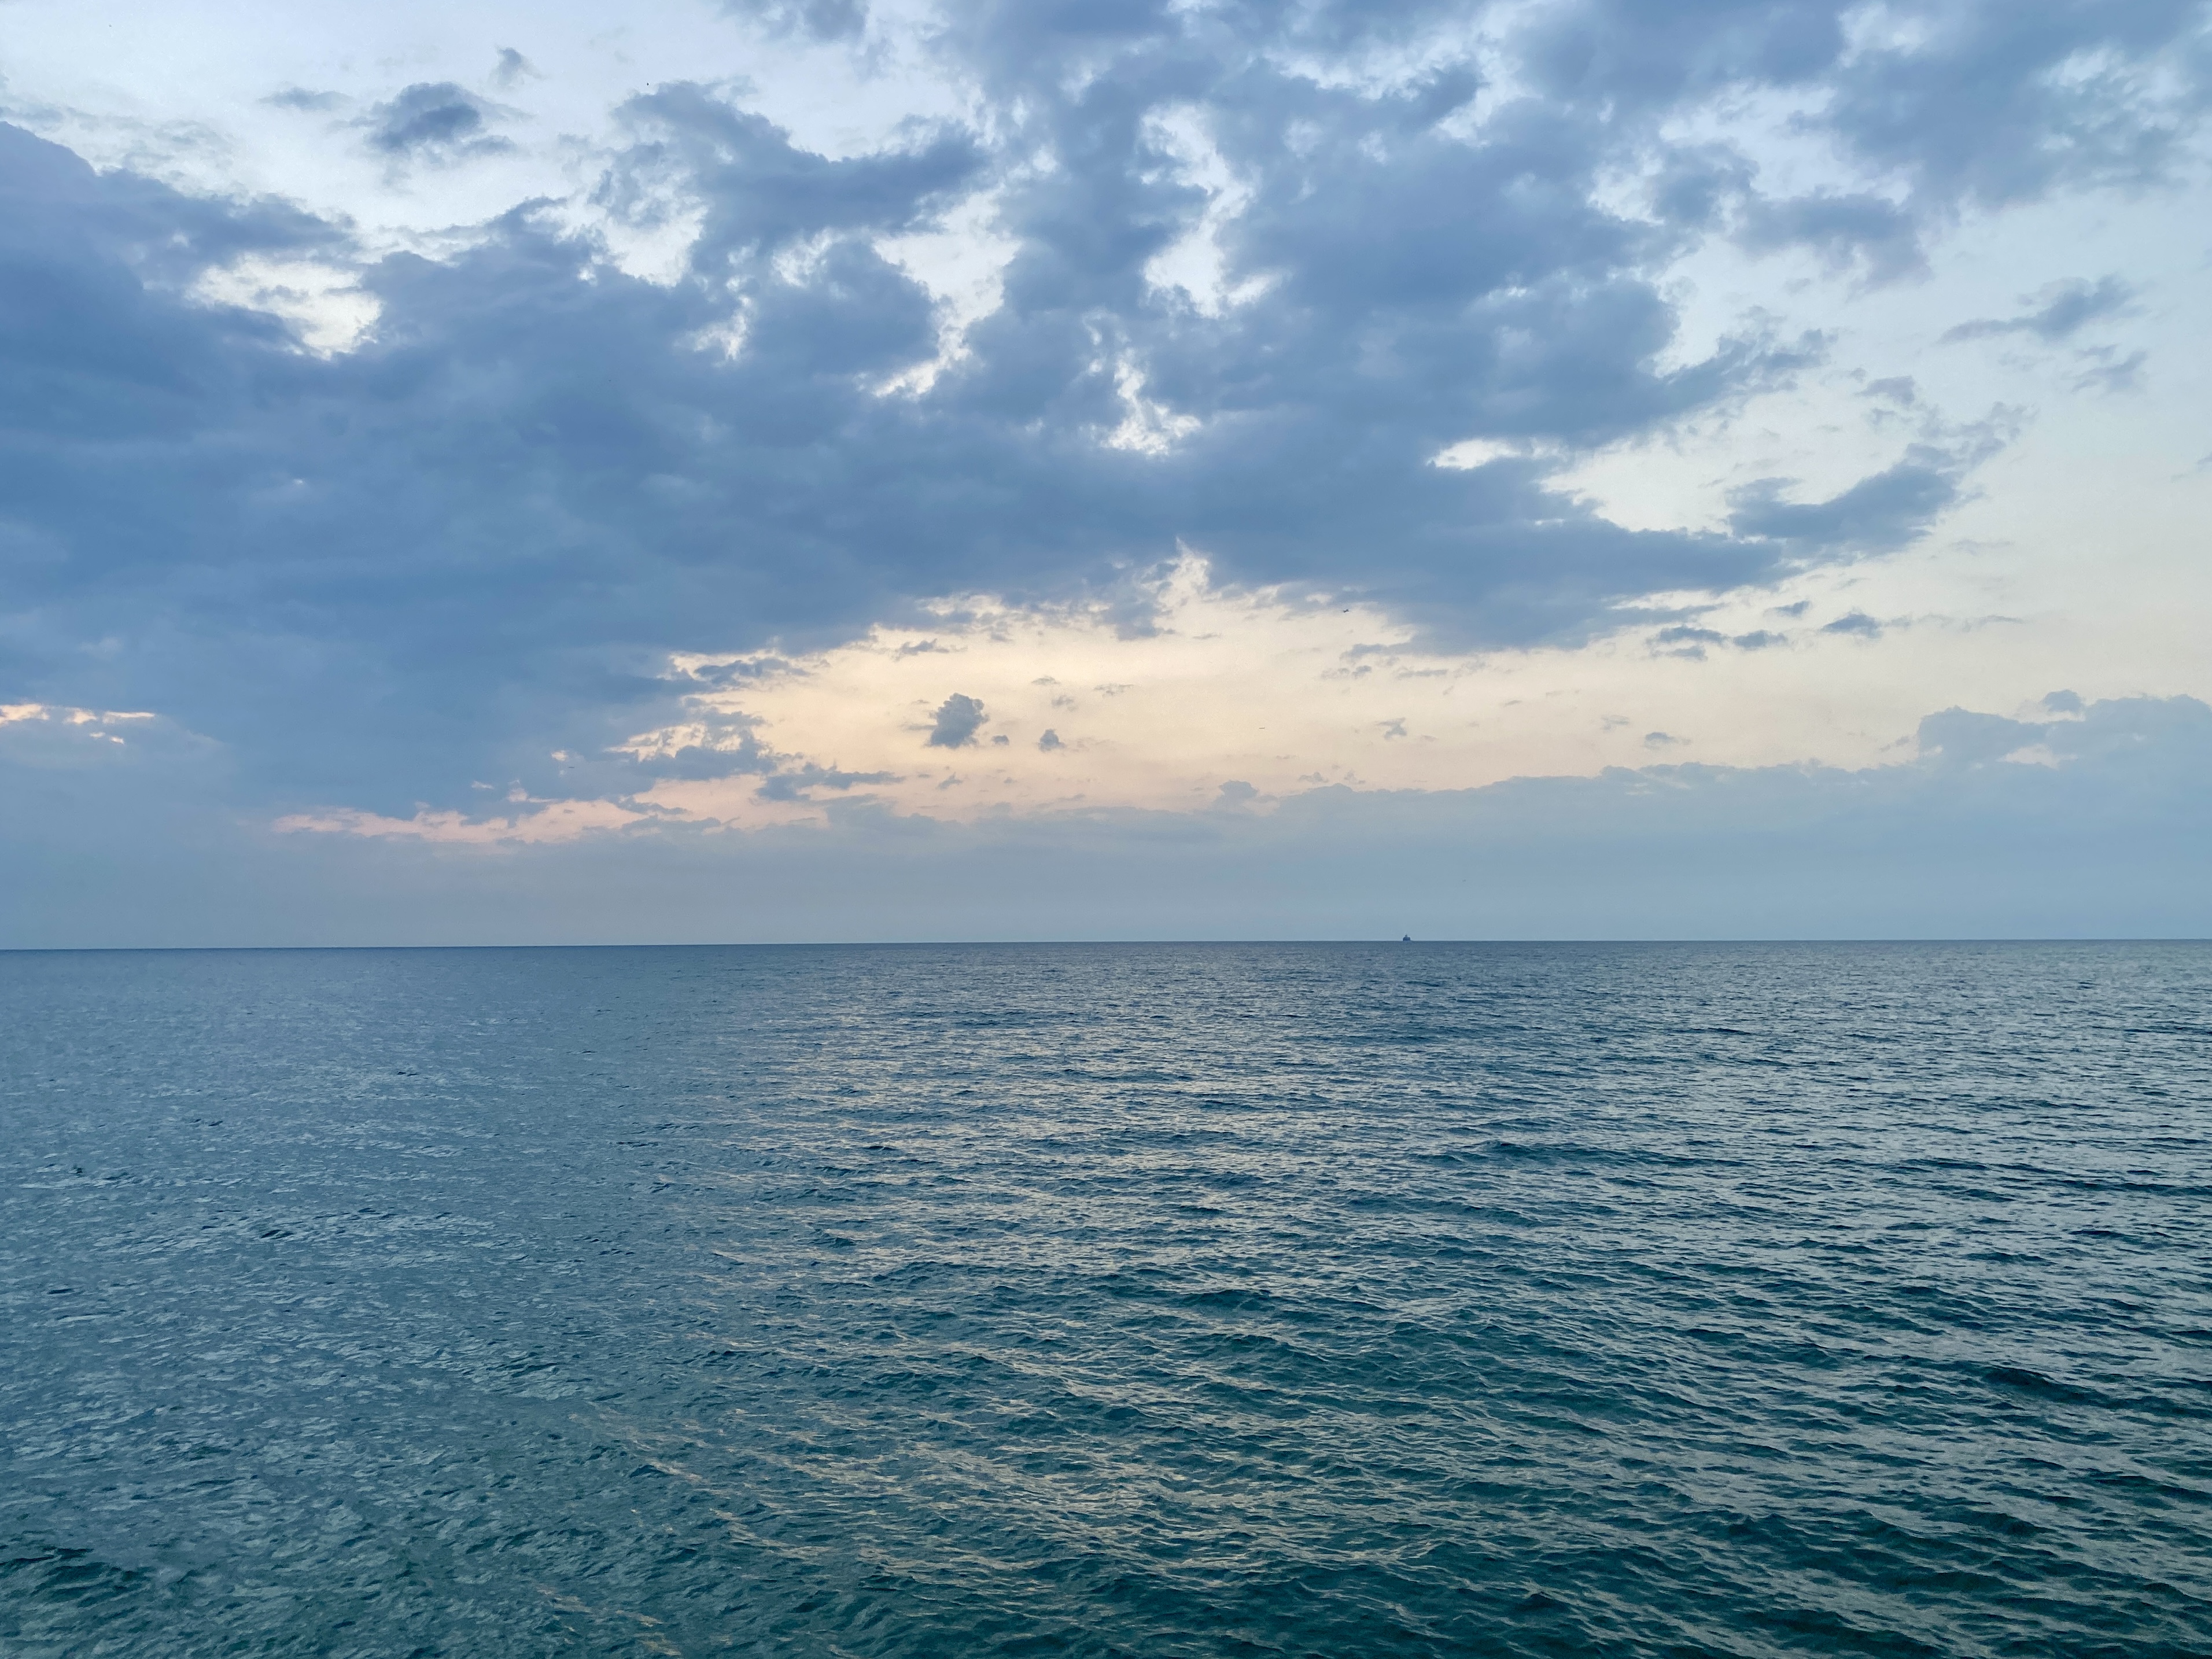 A large lake under a soft blue sky spotted with clouds, the water dark blue and calm, a hint of pink sunrise over the horizon